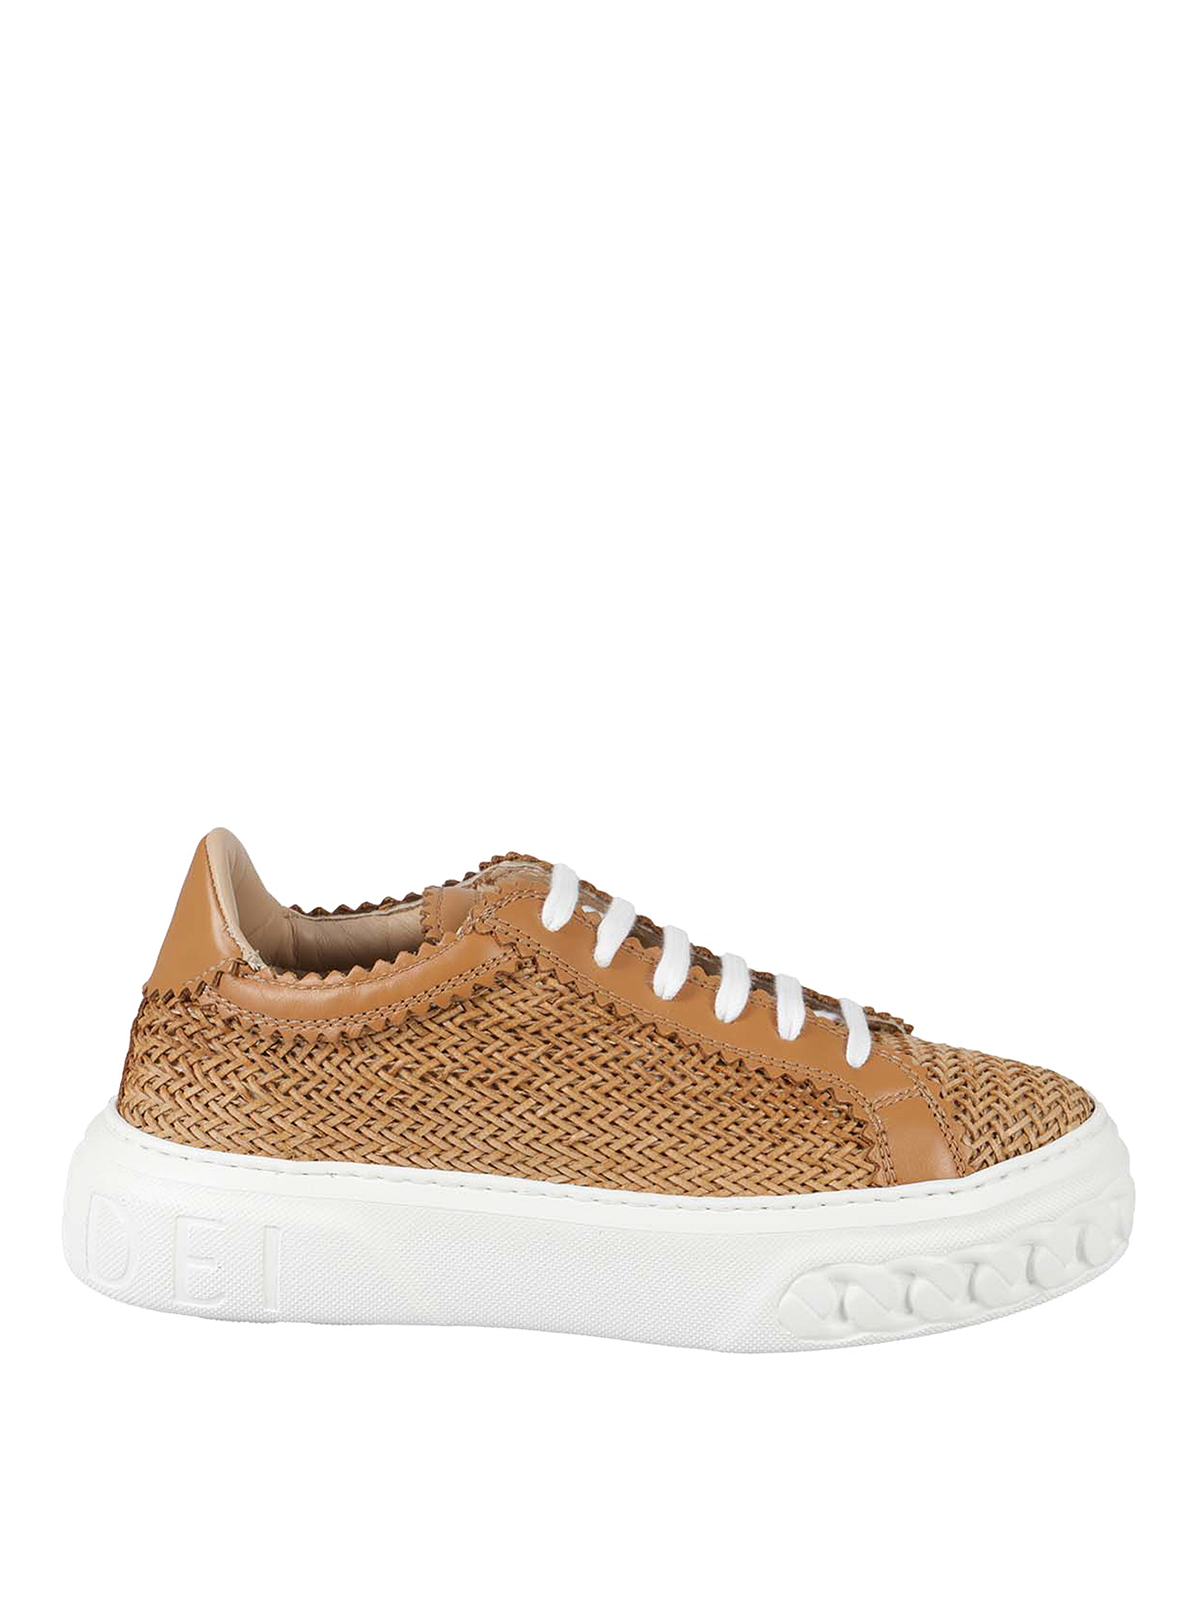 CASADEI WOVEN LEATHER SNEAKERS